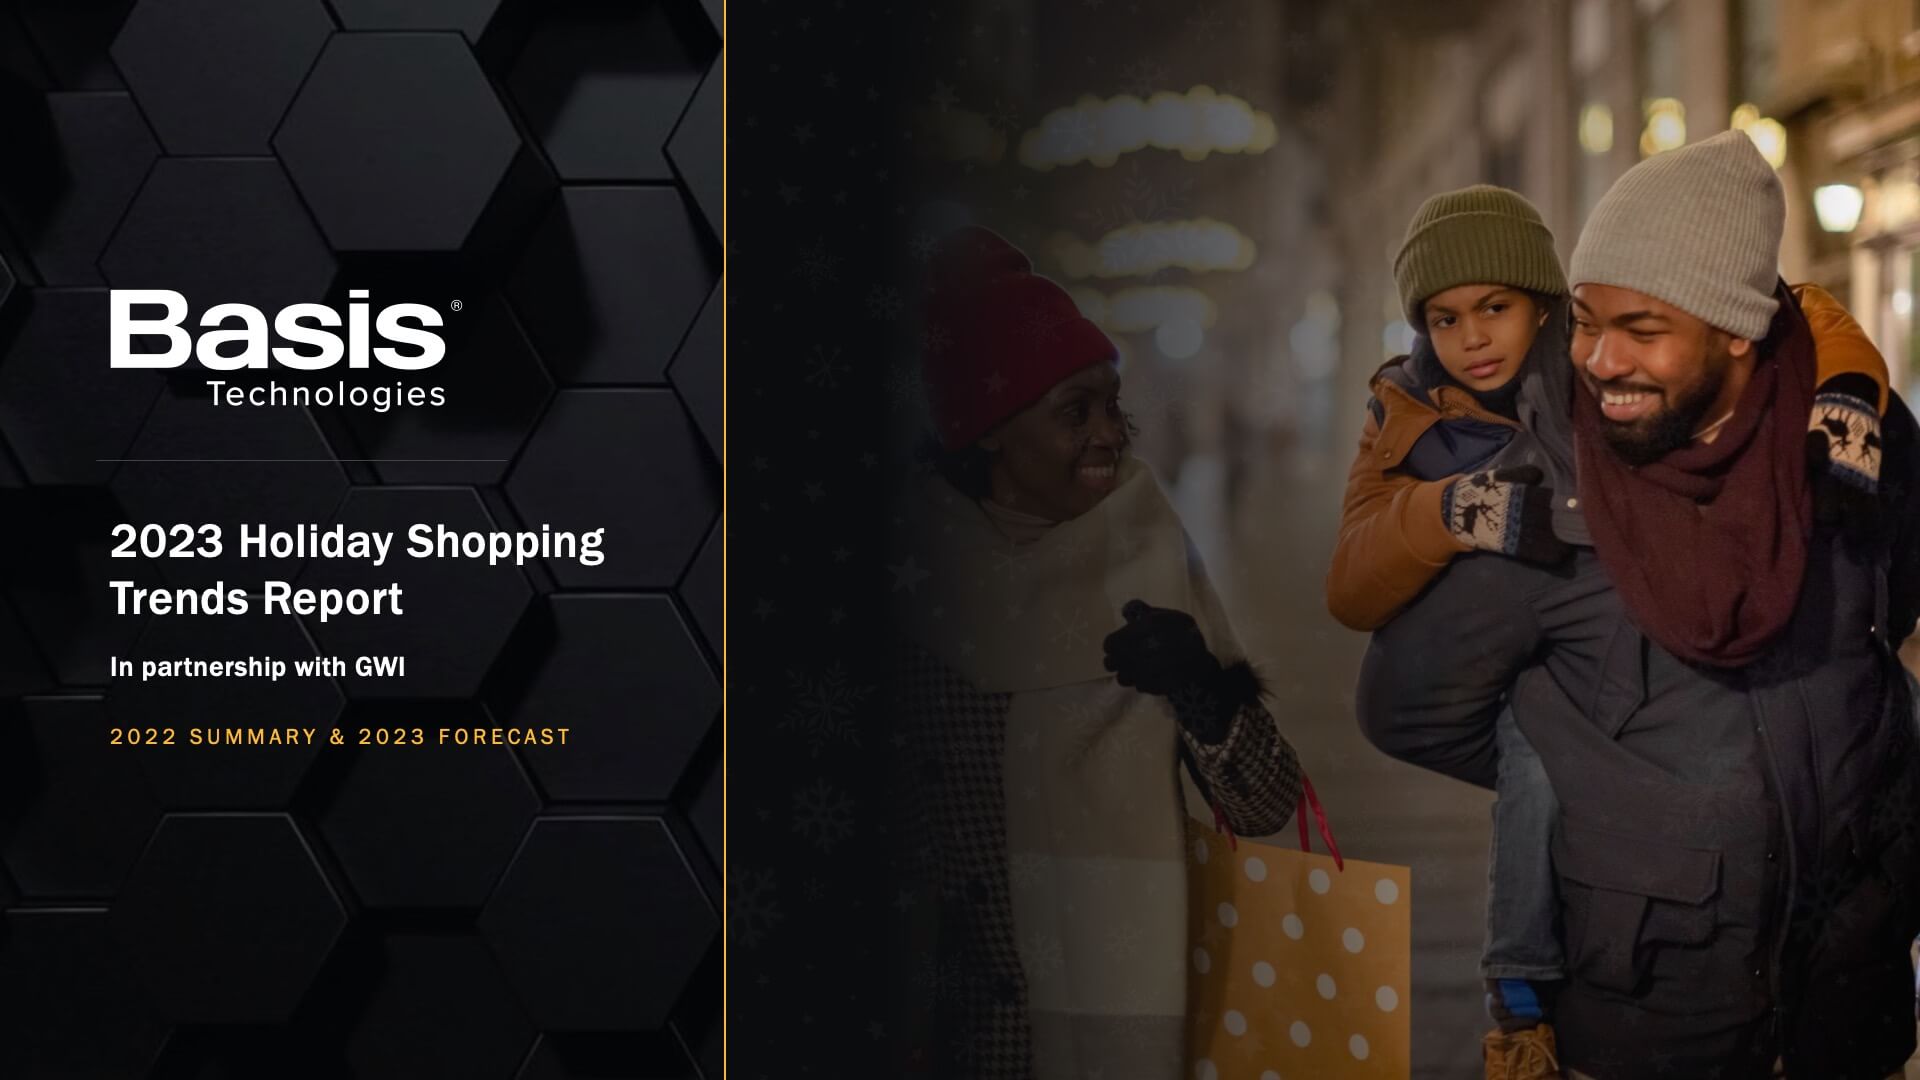 Cover imager of holiday shopping trends report featuring family shopping